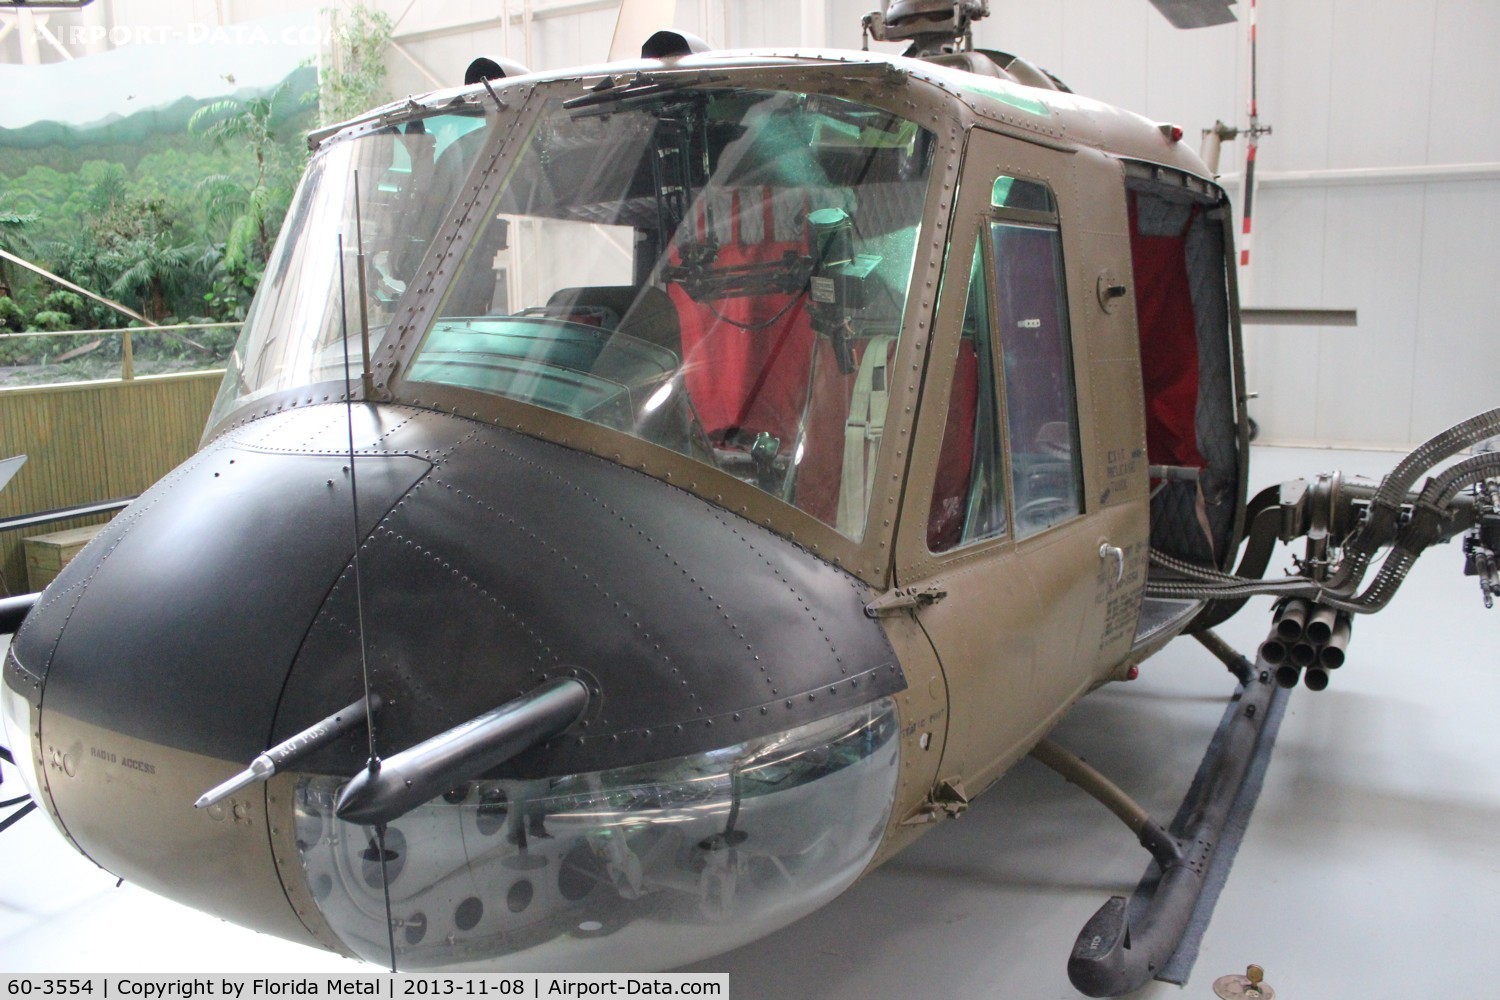 60-3554, 1960 Bell UH-1B Iroquois C/N 200, UH-1B Iroquois at Army Aviation Museum